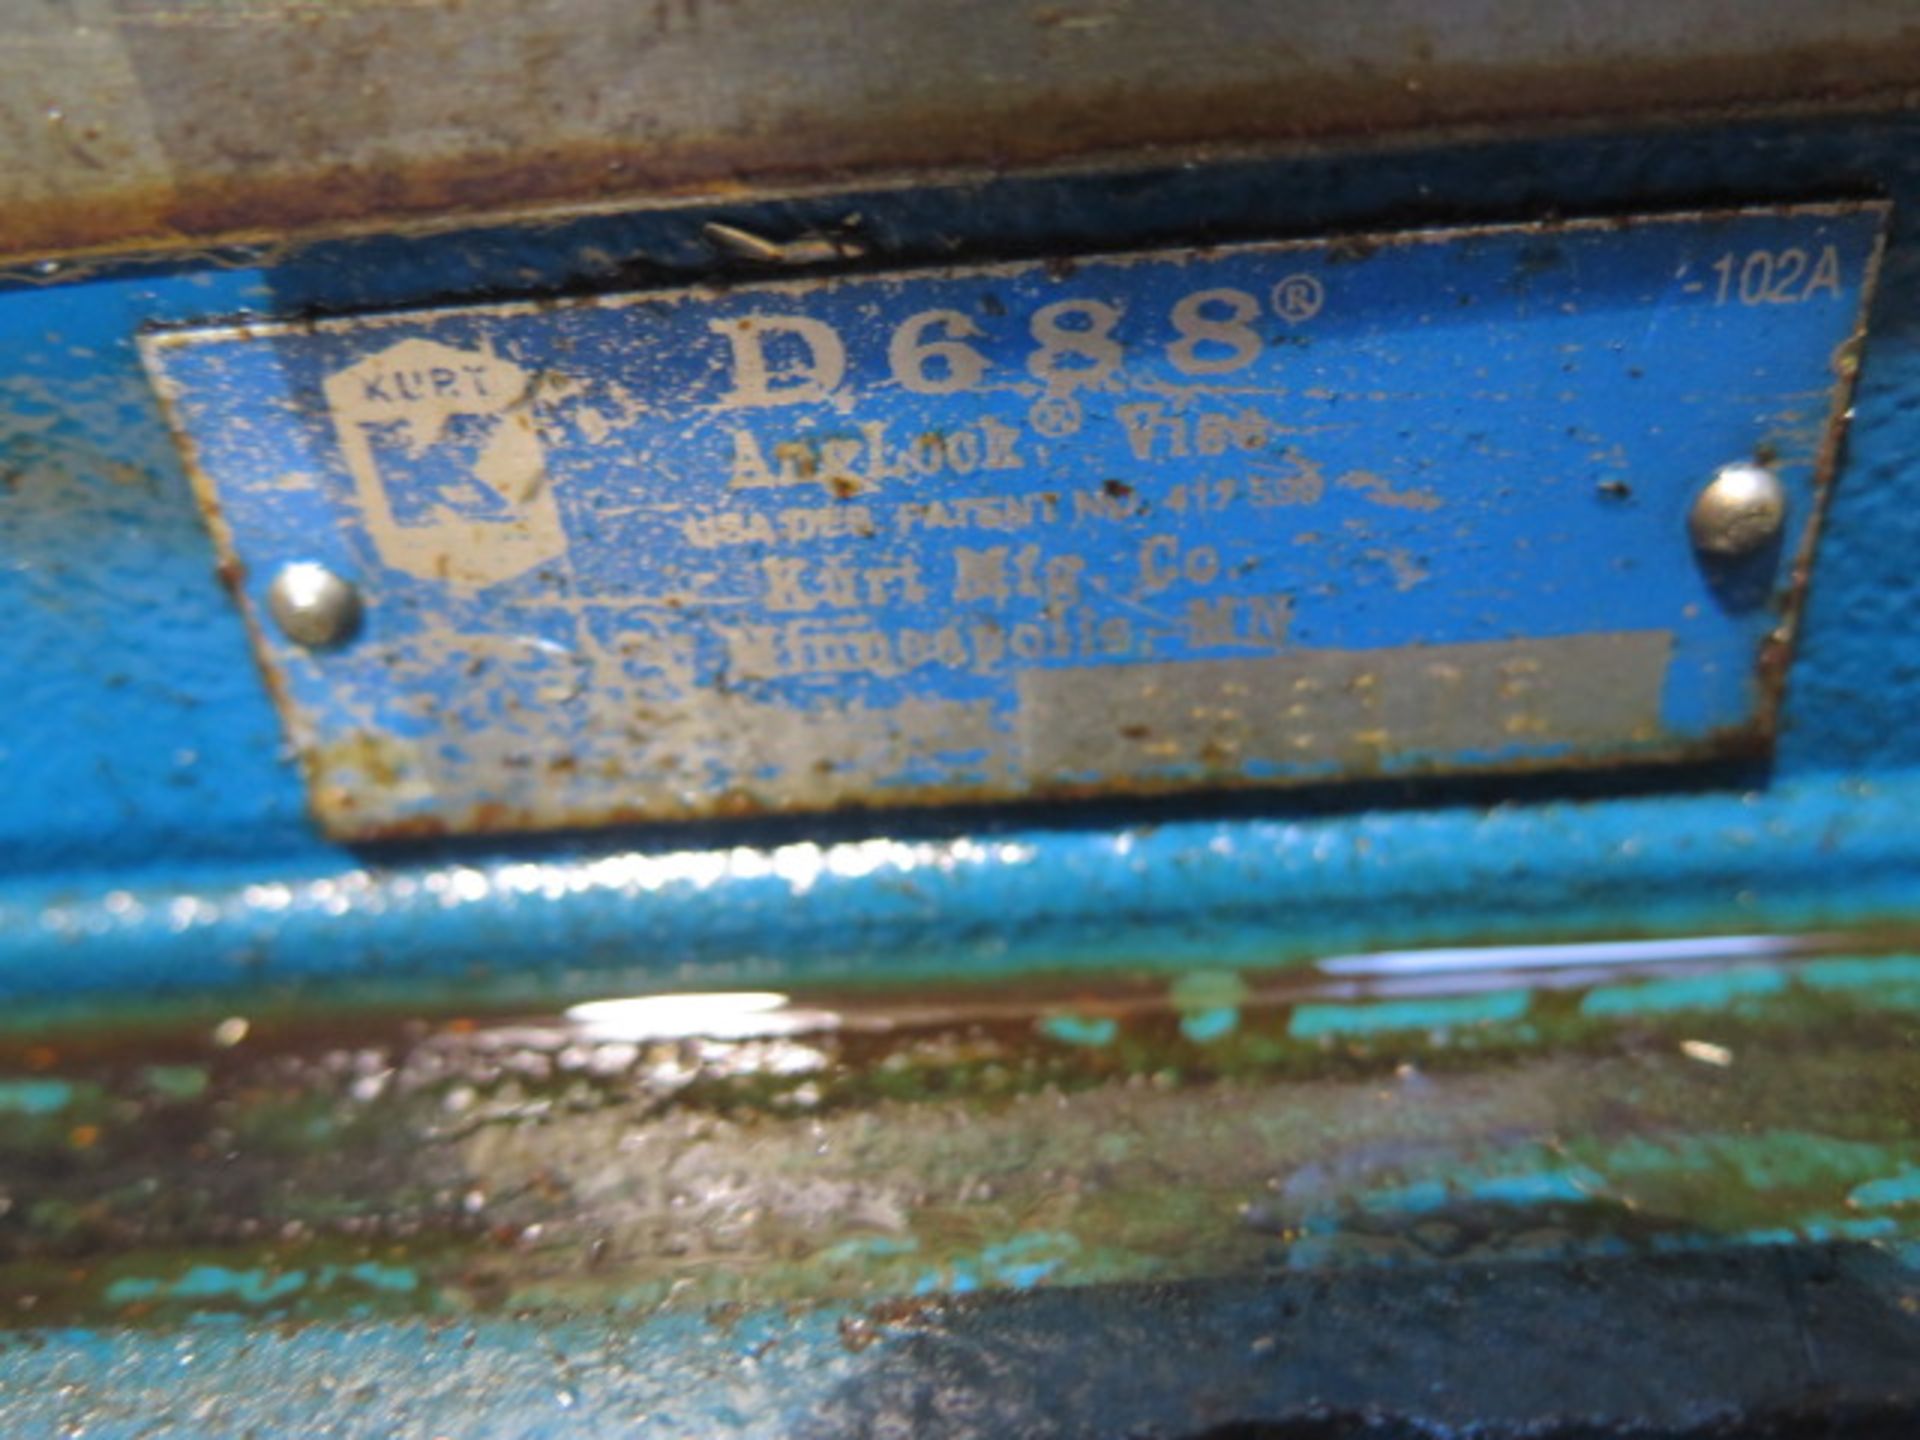 Kurt D688 6" Angle-Lock Vise (SOLD AS-IS - NO WARRANTY) - Image 4 of 4